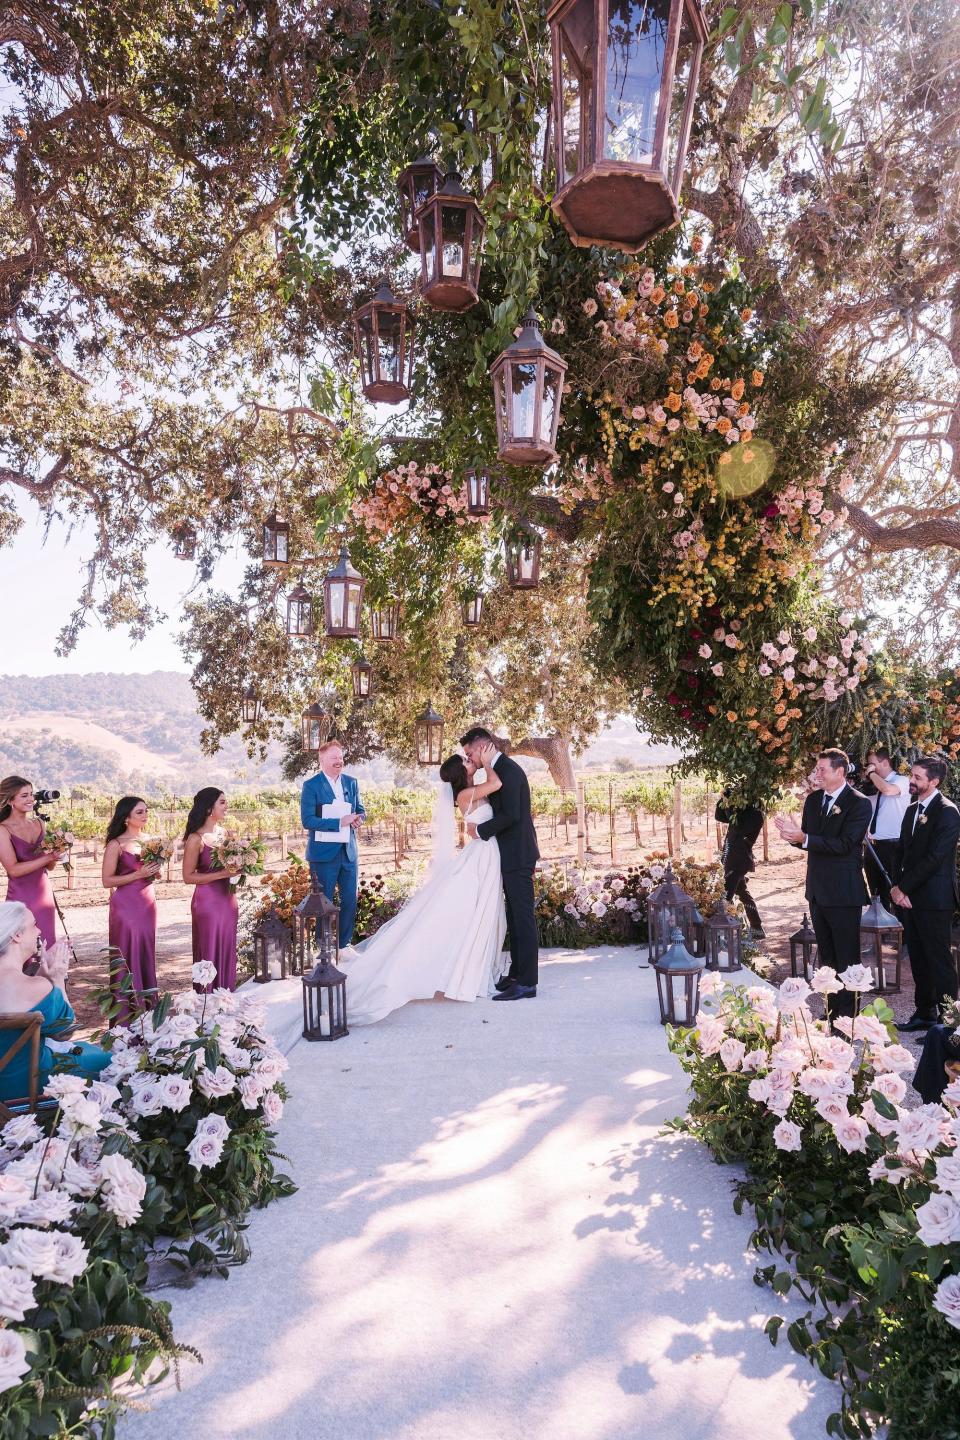 Sarah Hyland and Wells Adams kiss during their wedding ceremony.